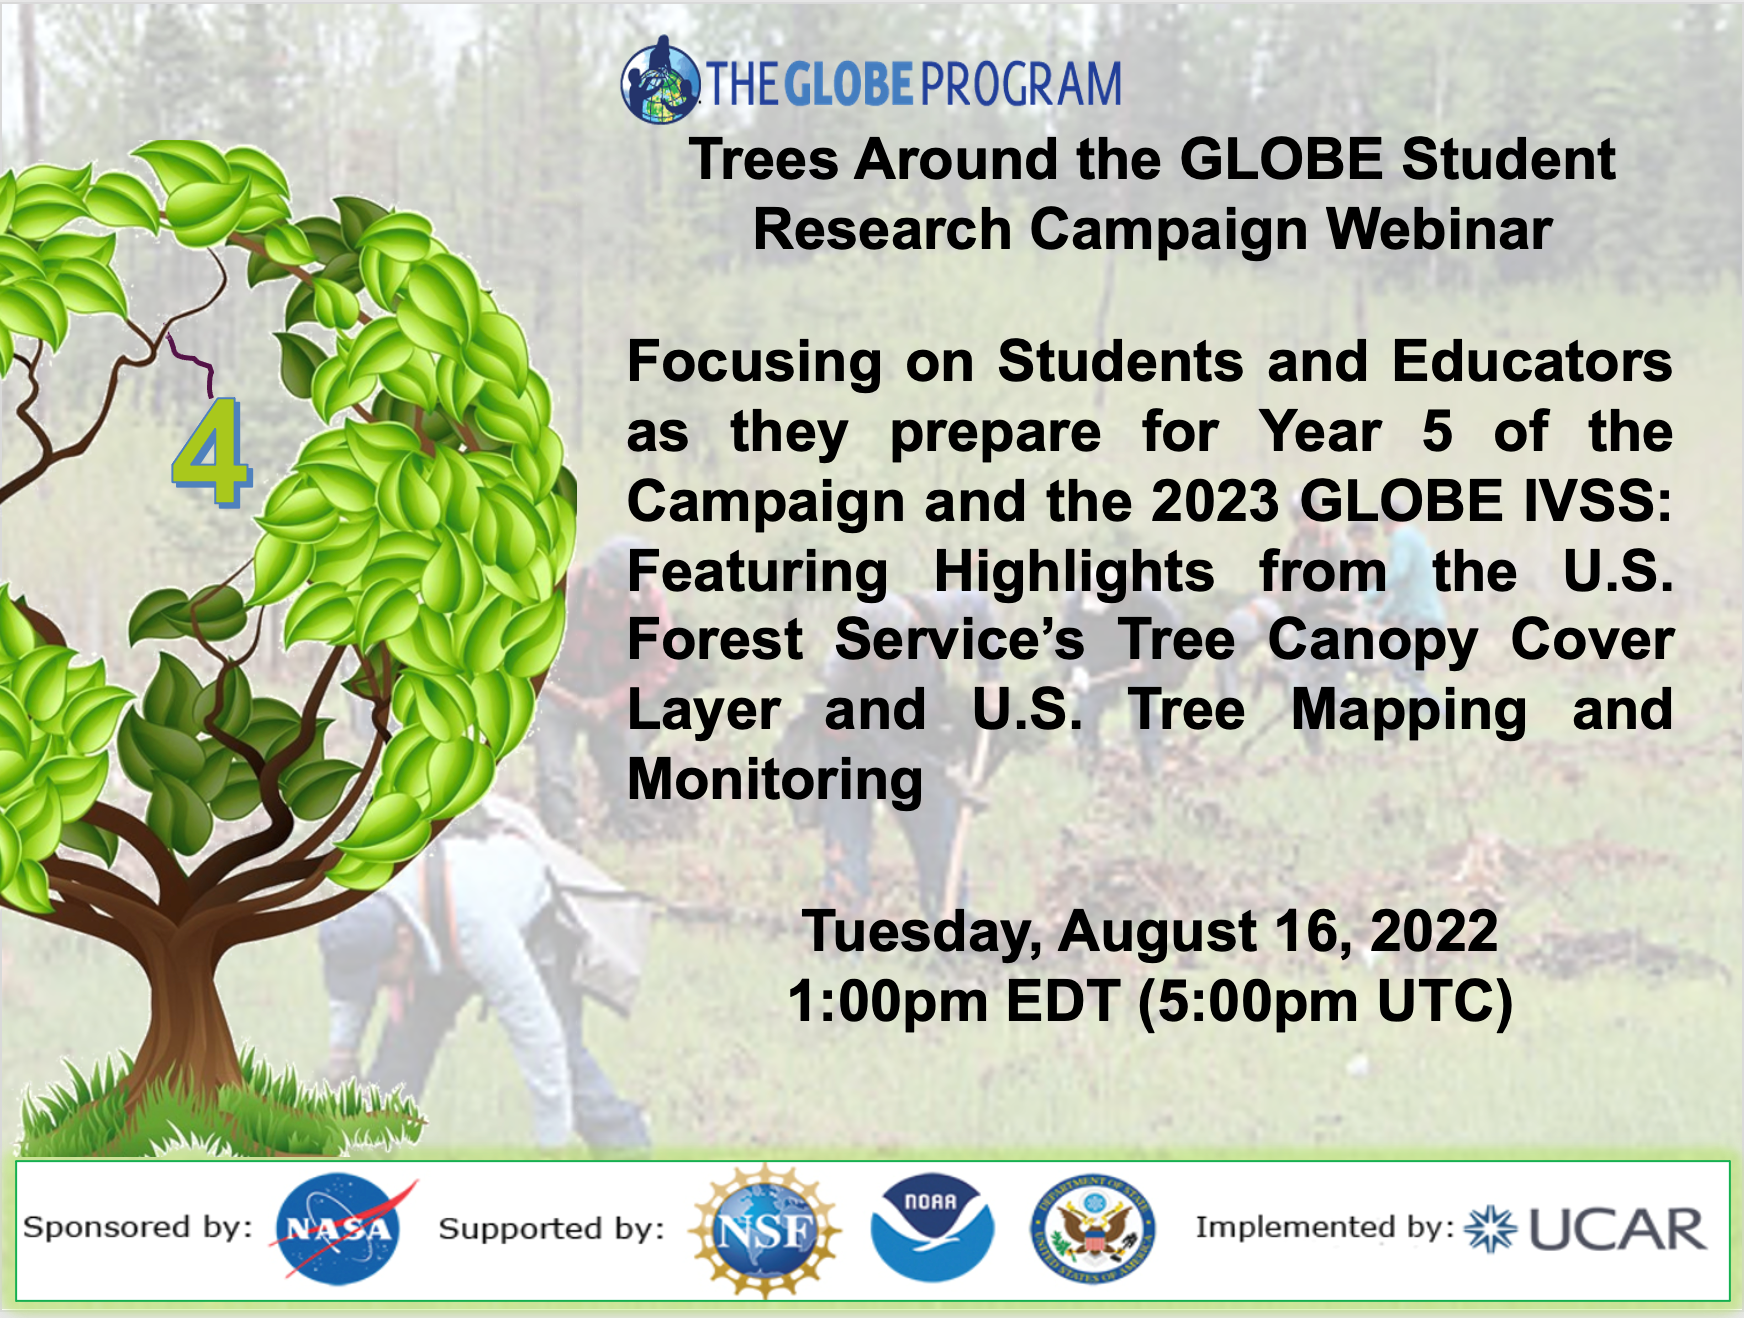 Trees Around the GLOBE 16 August webinar shareable, with the title and date of the event